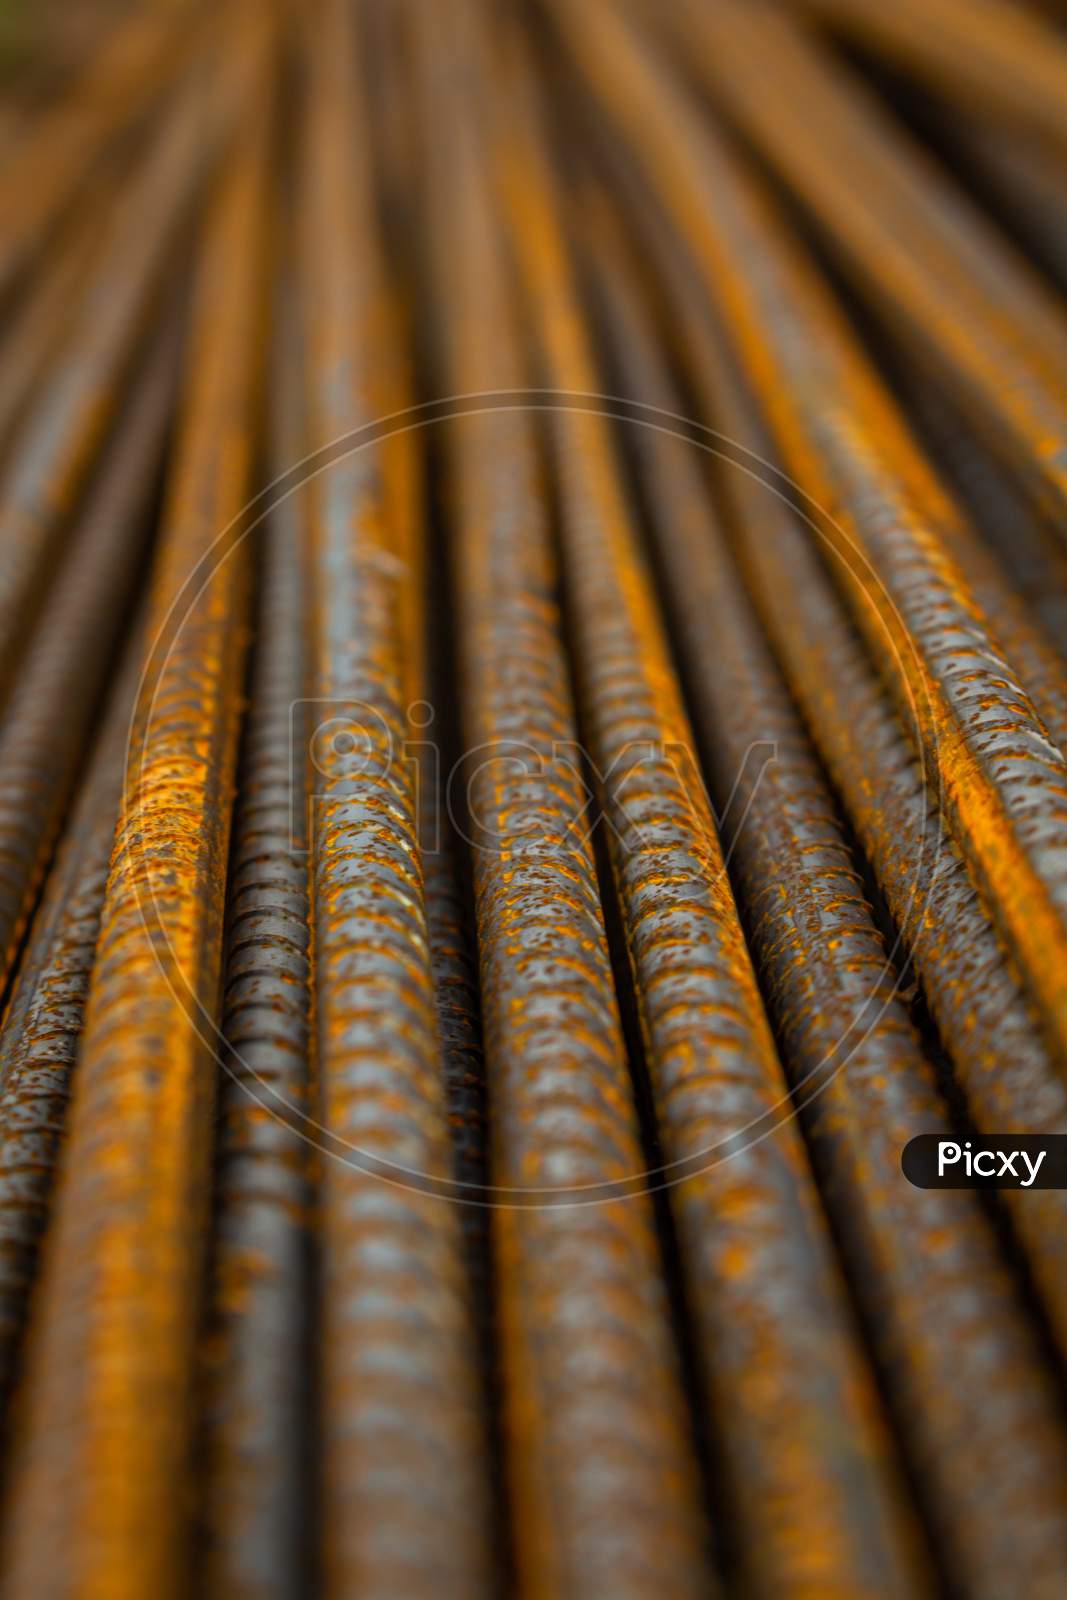 Steel Rods For Construction. Metal Used To Make Columns. Metal With Reddish Rust Stains. Background For Designers.